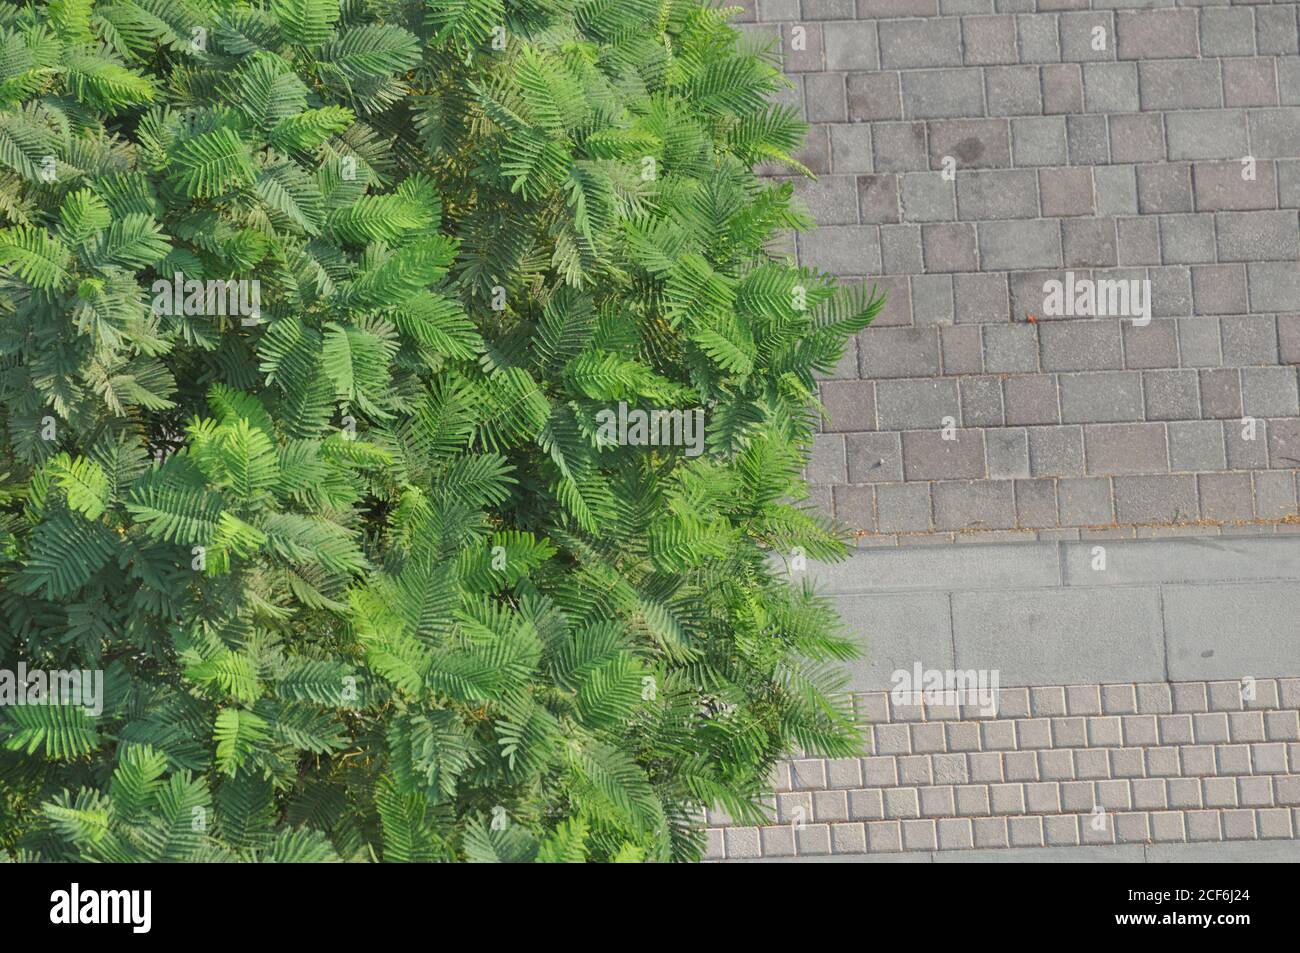 Urban jungle tree against concrete background. Windy, leafy, emerald and olive green tree colors. Nature vs man made designs. Stock Photo